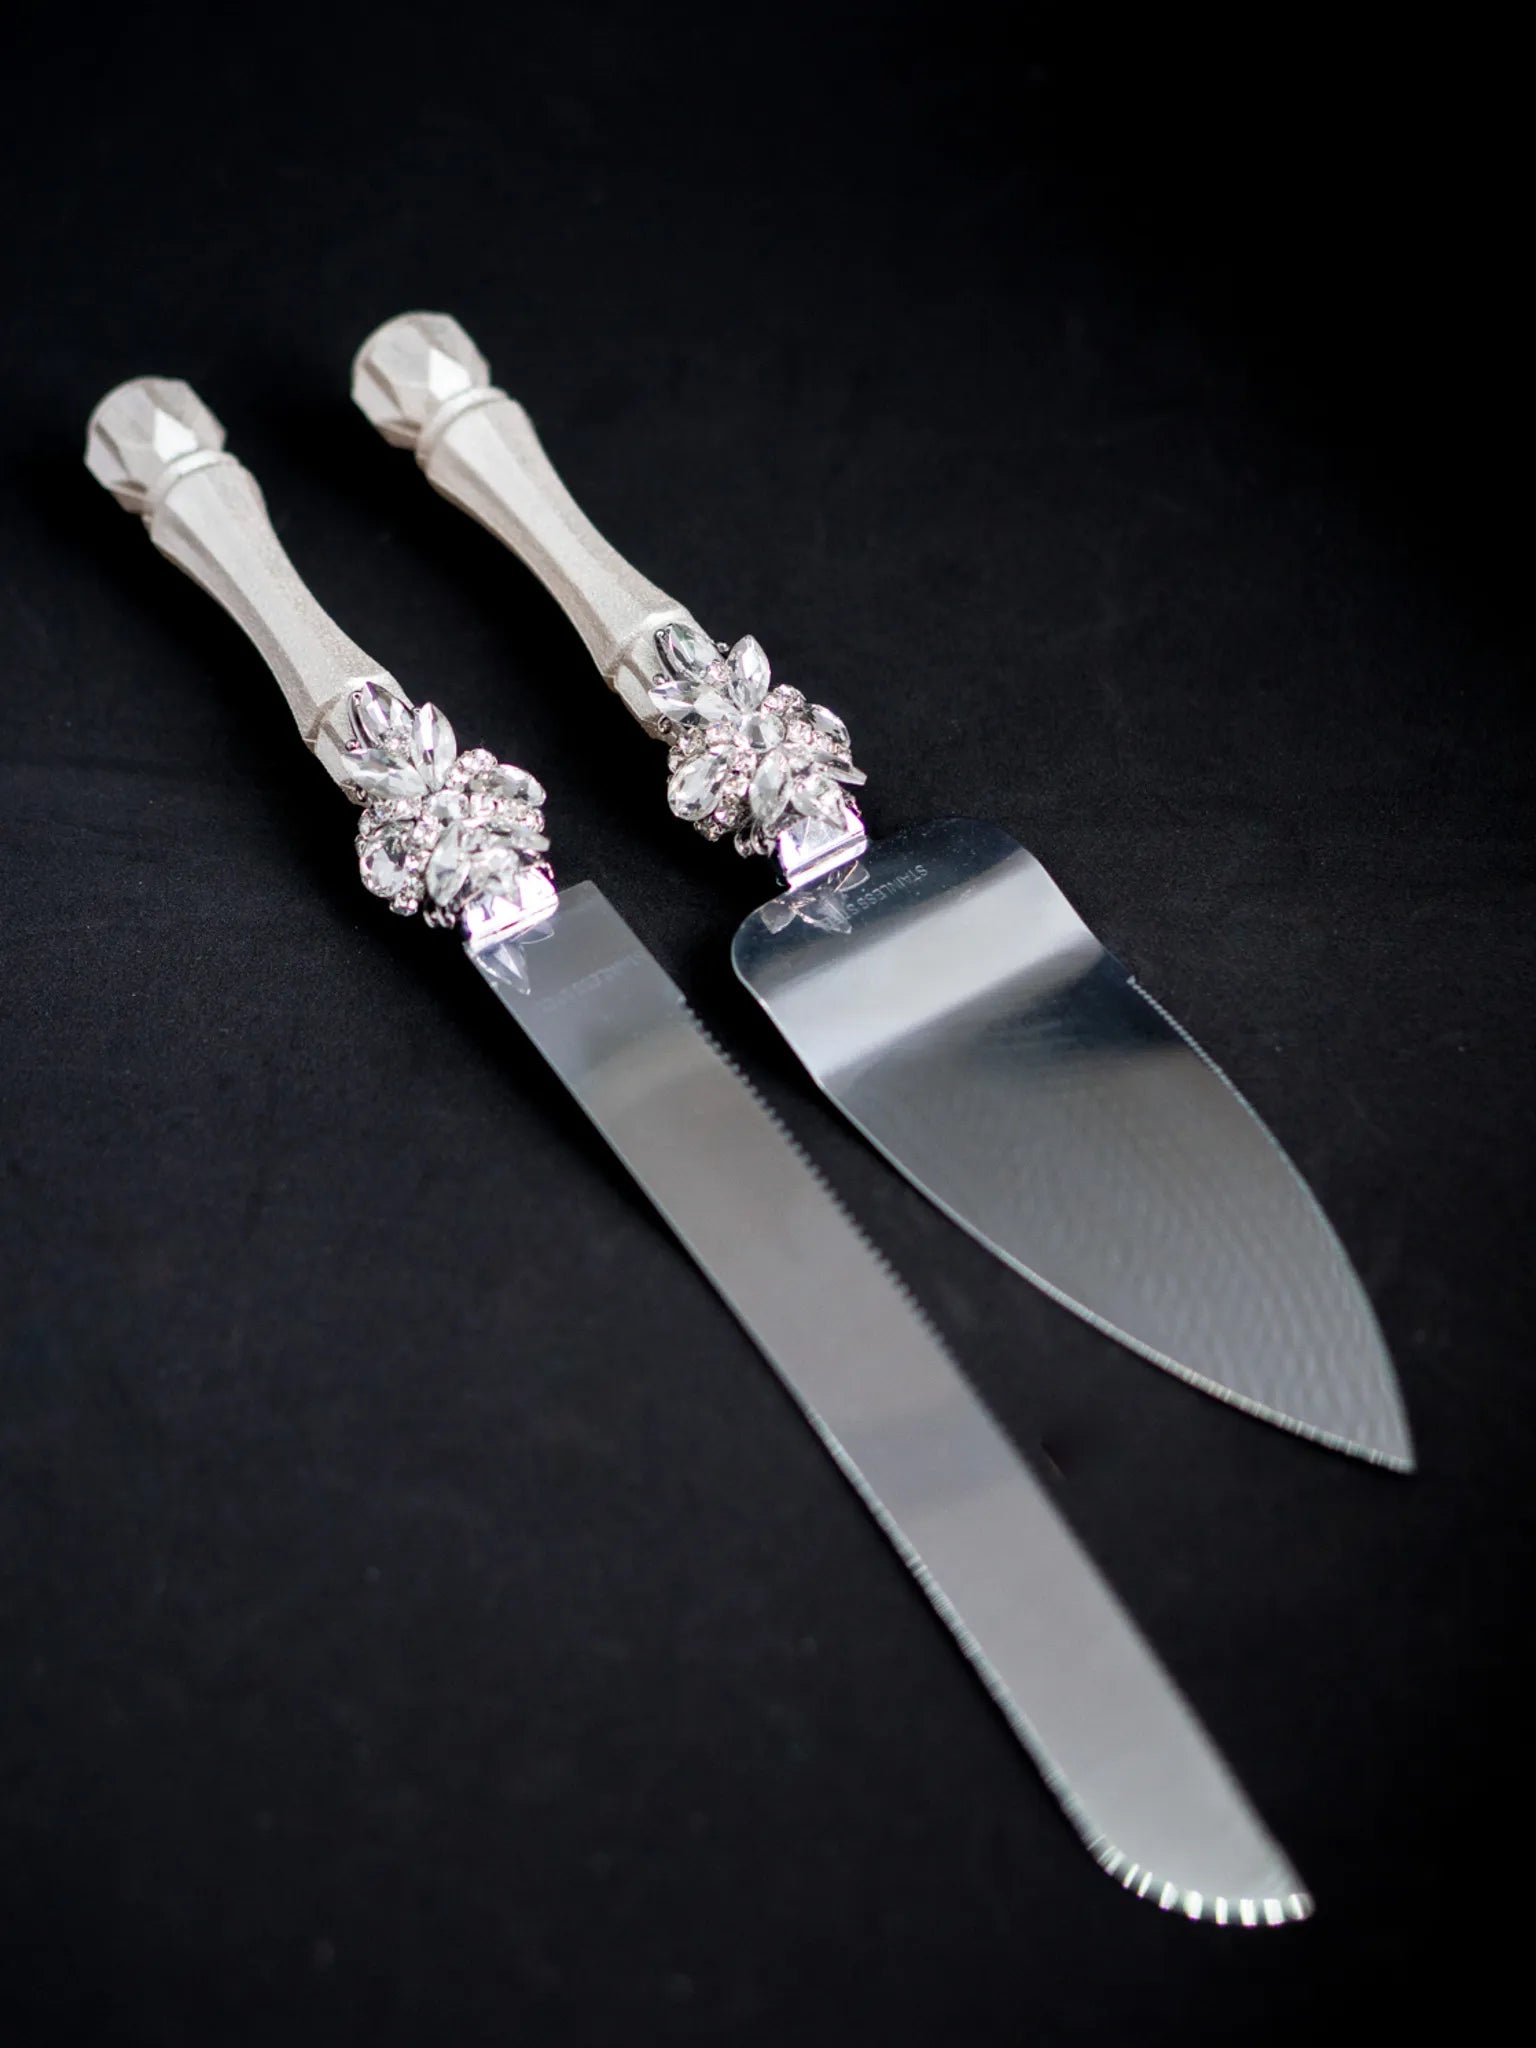 Ivory and silver crystal wedding cake cutting set